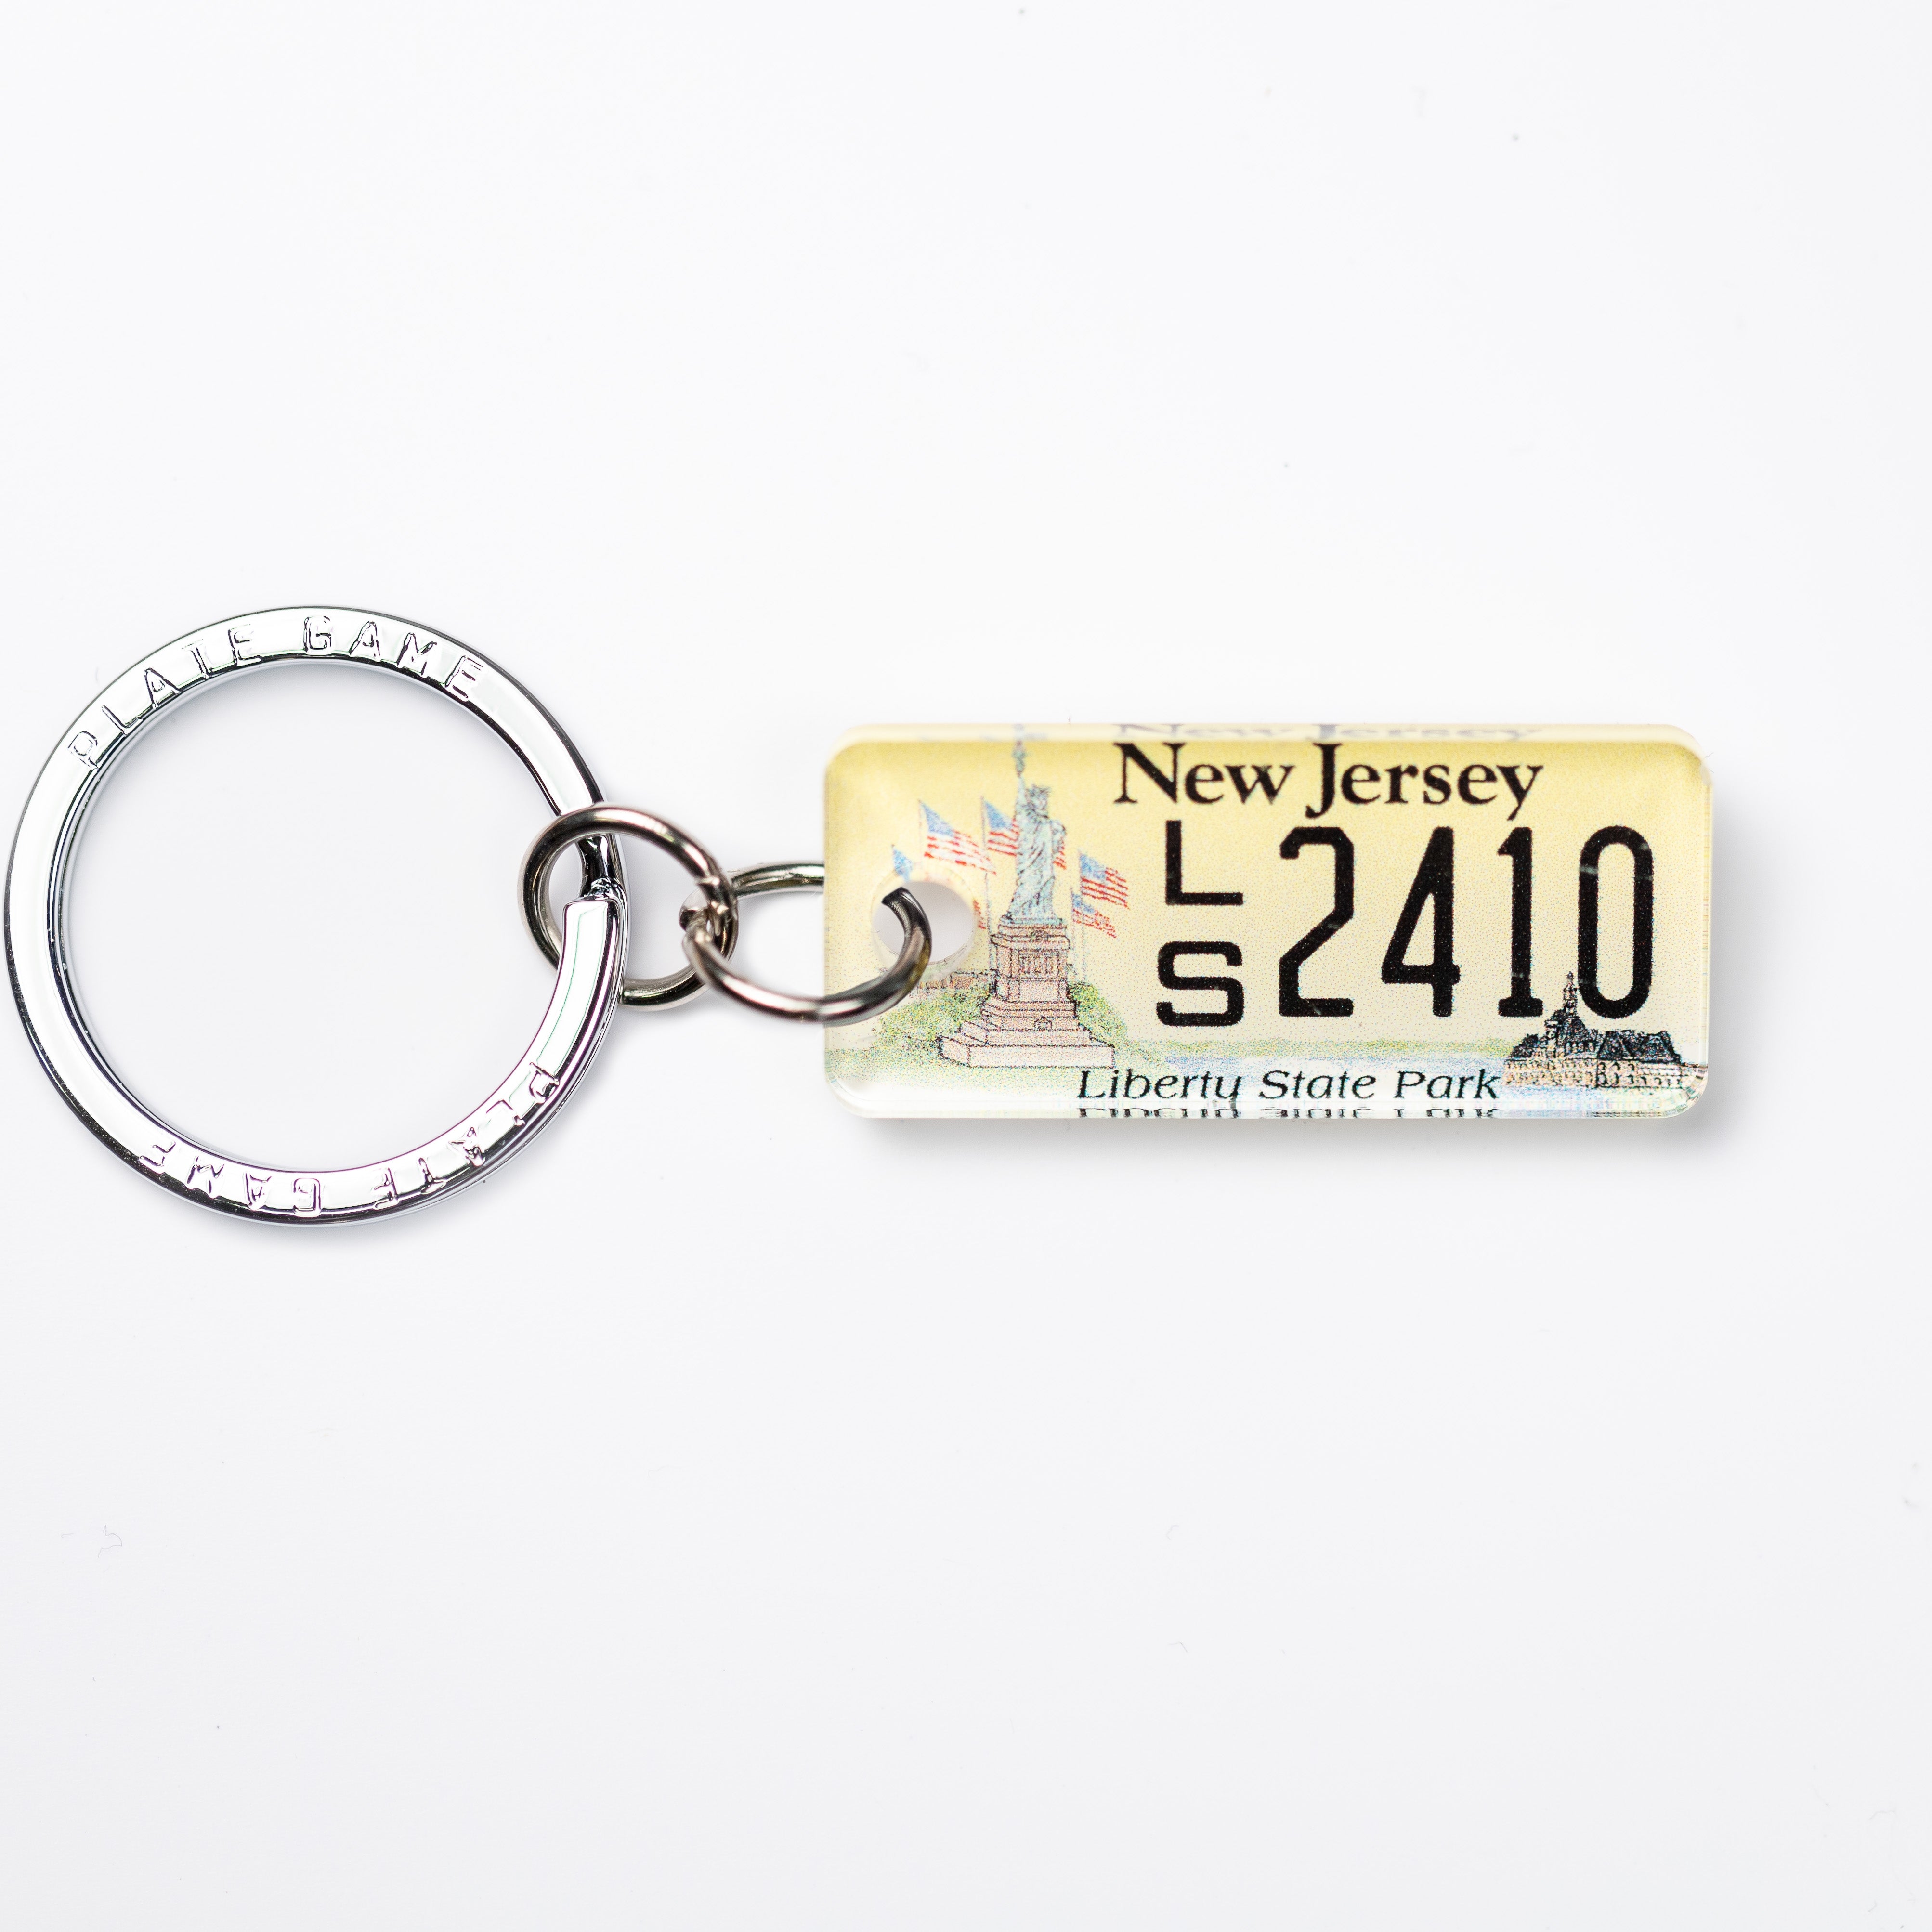 New Orleans Louisiana State License Plate Tag Novelty Key Chain KC-6179 - Novelty Products - Gift Items - Personalized & Customizable Options- Smart